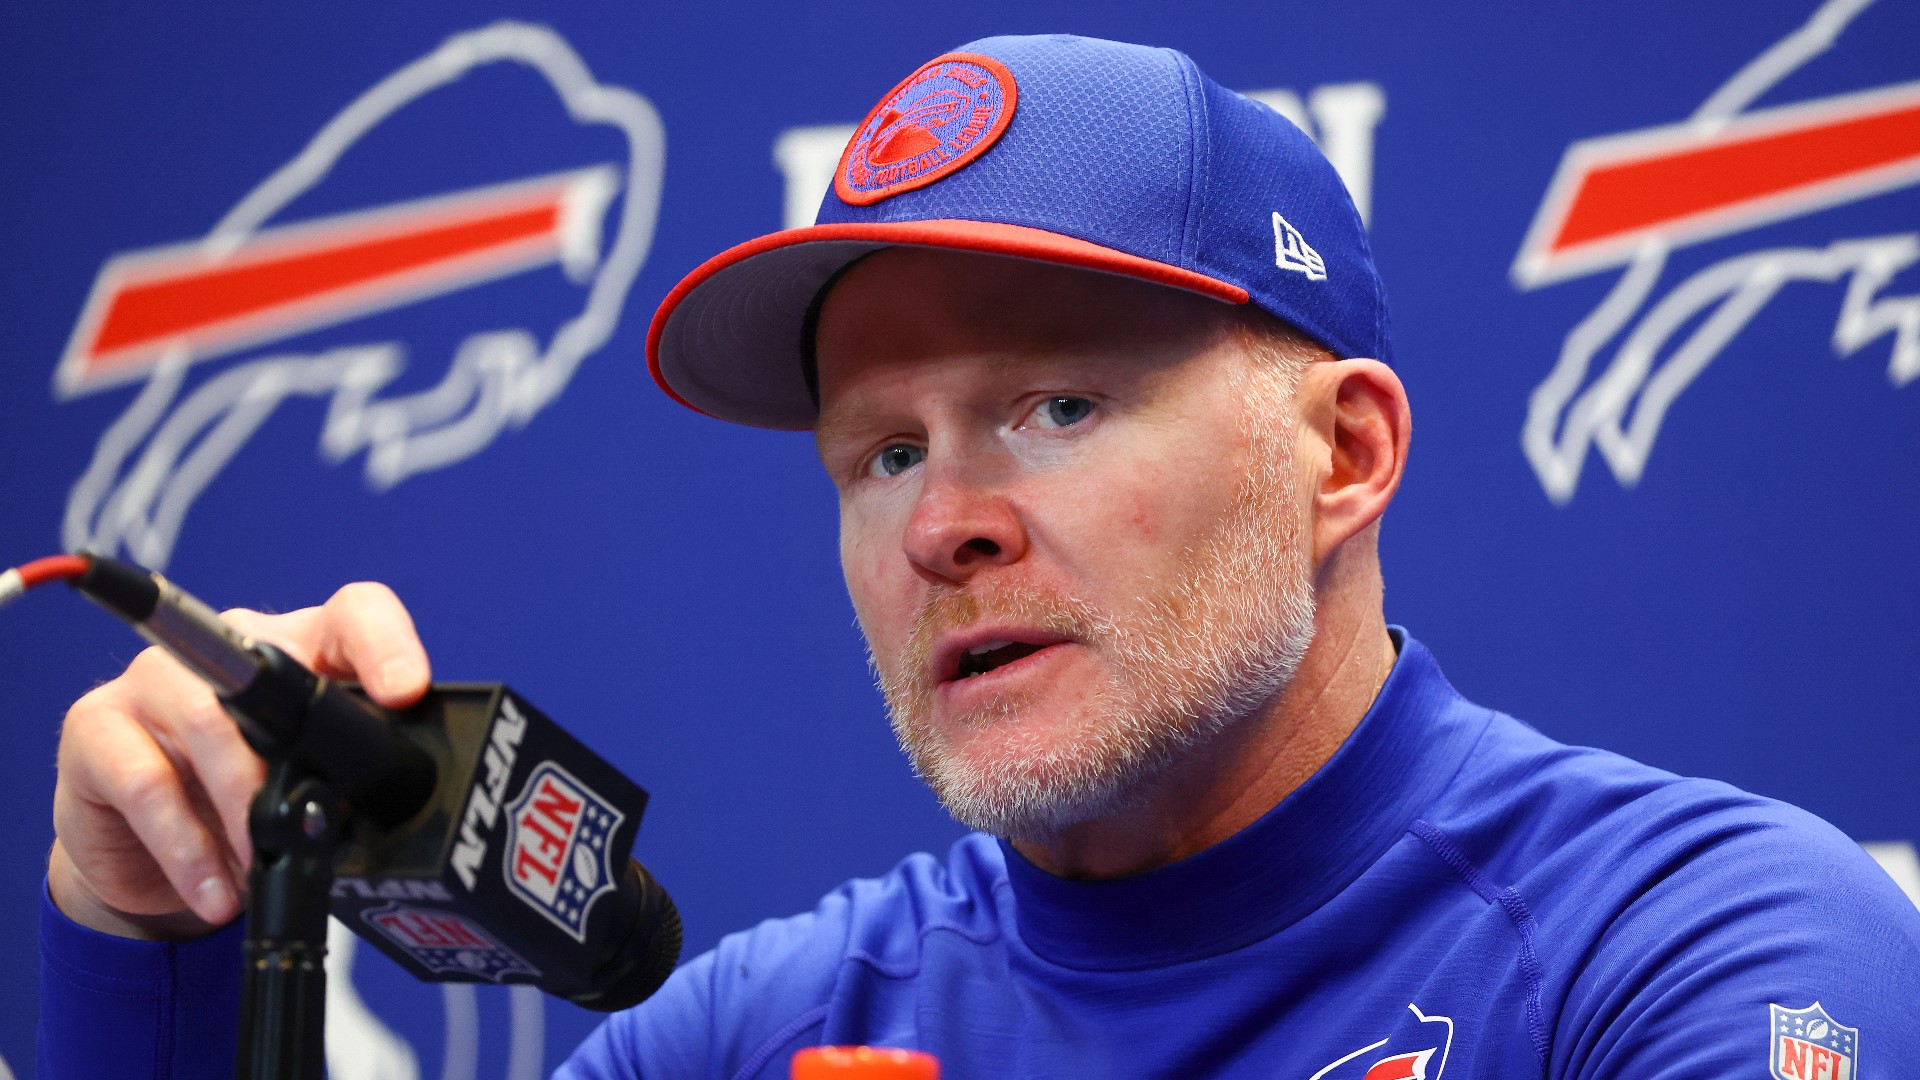 Bills postgame reaction: Sean McDermott discusses the 31-10 Bills victory against the Dallas Cowboys.